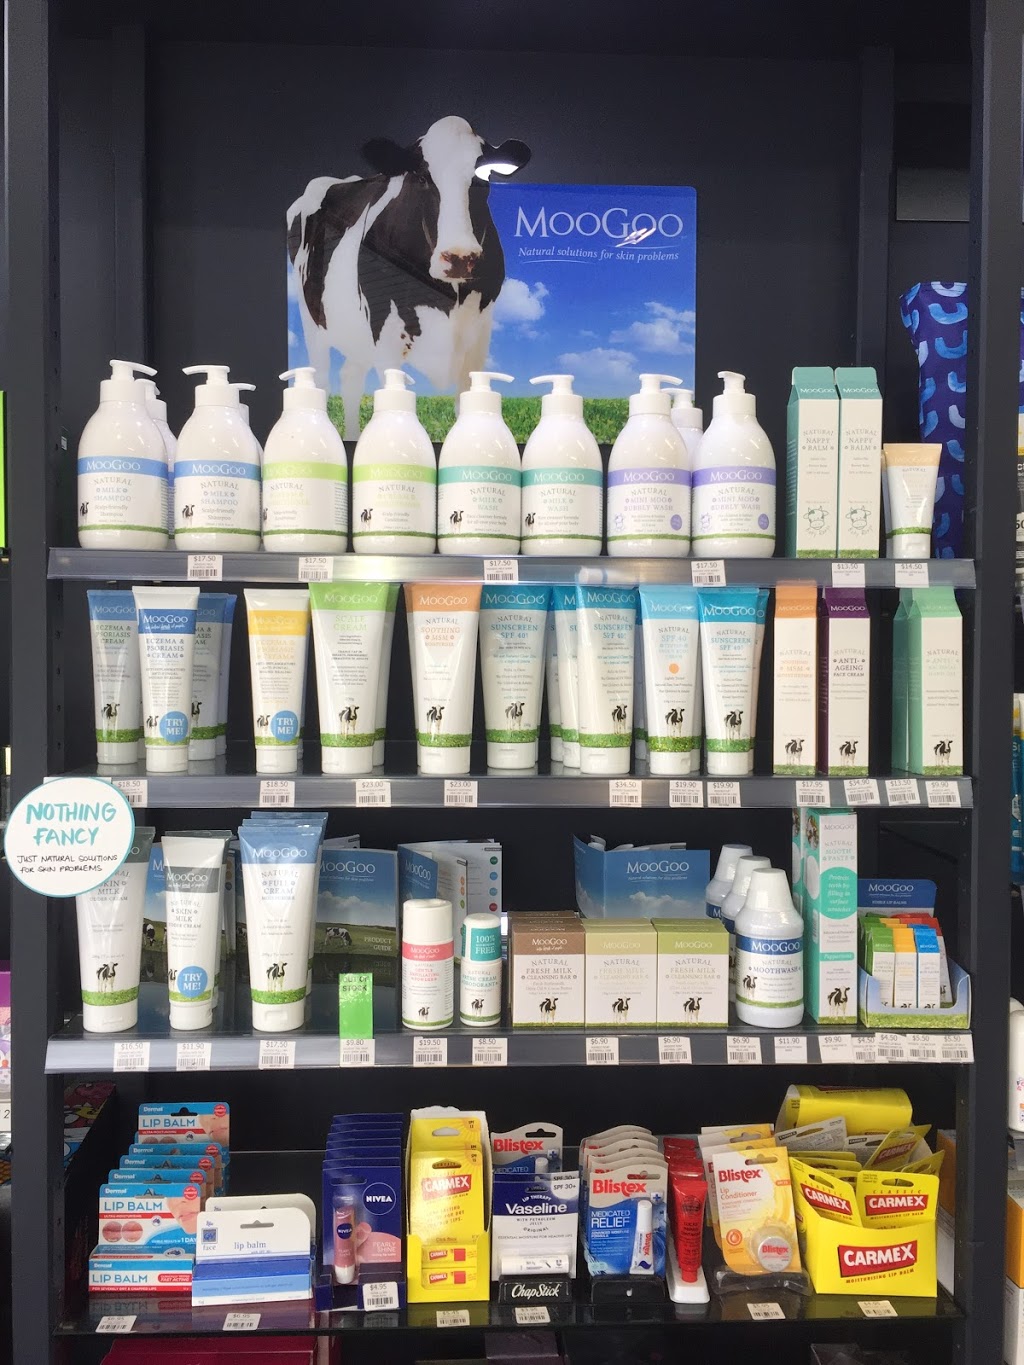 Thirroul Pharmacy | health | shop 4/277A Lawrence Hargrave Dr, Thirroul NSW 2515, Australia | 0242681067 OR +61 2 4268 1067